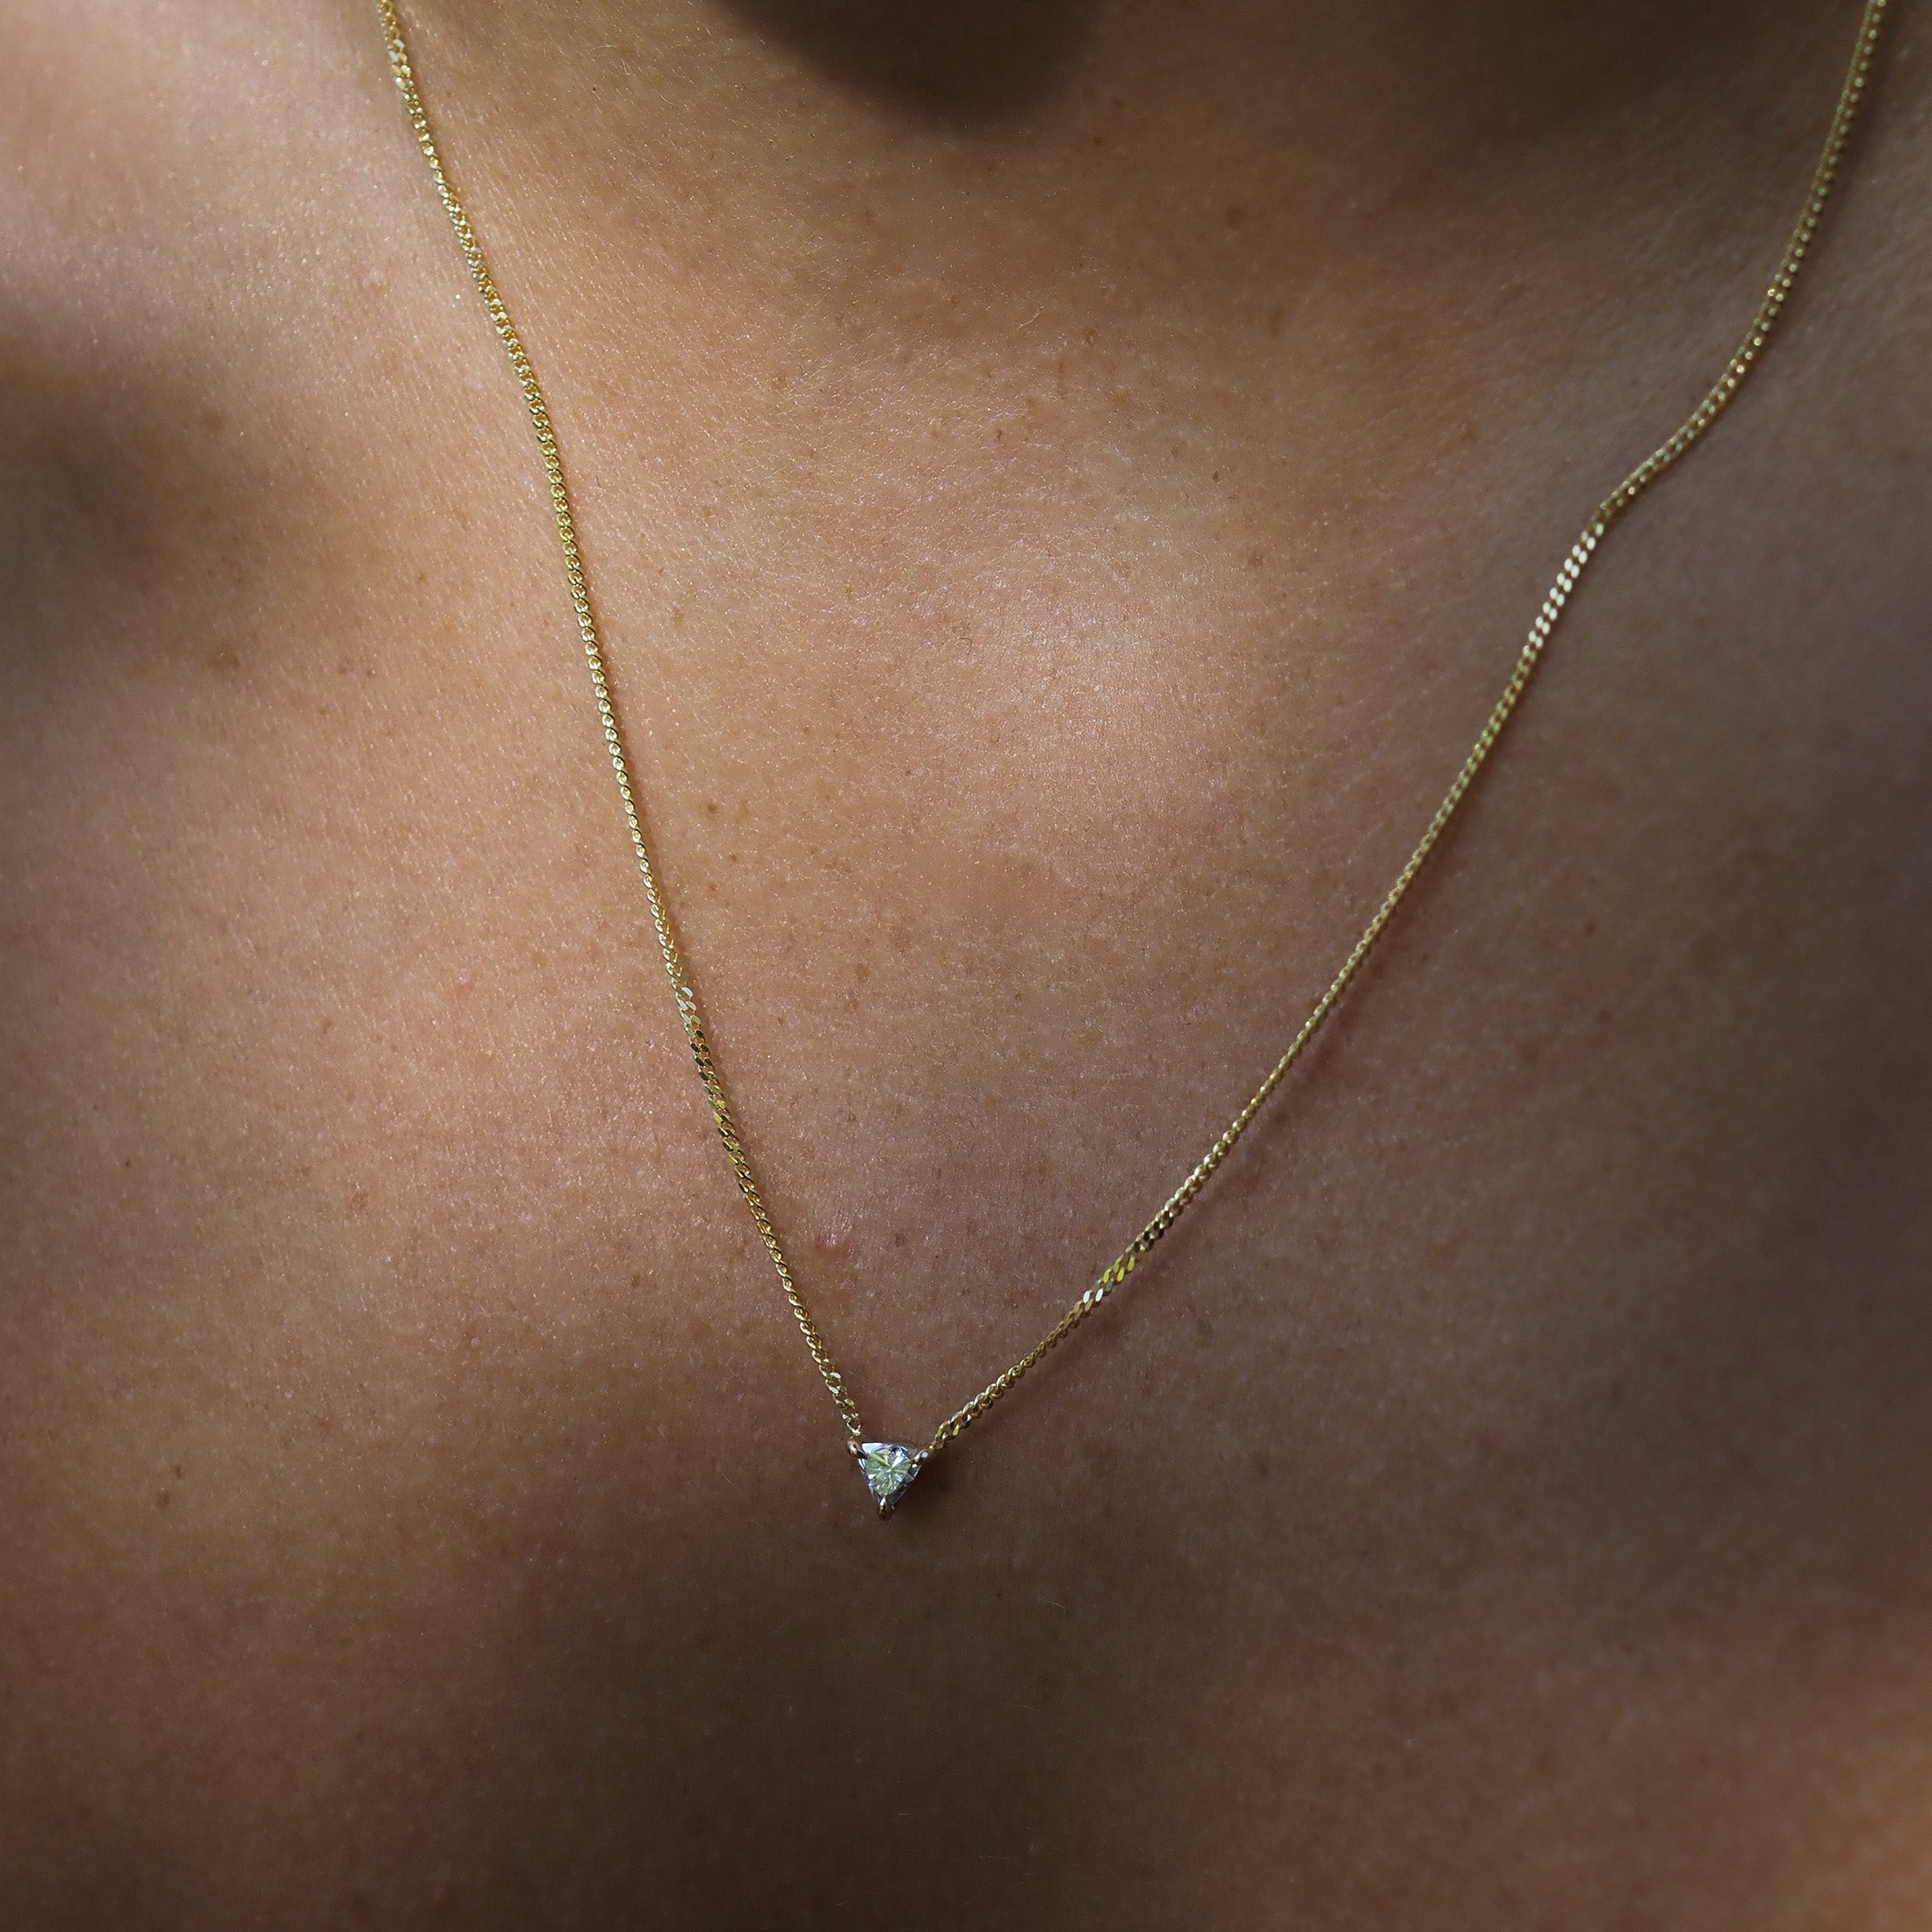 The Trillion Diamond Necklace features a triangular lab-grown diamond fixed on a yellow gold chain, handset within three claws. 